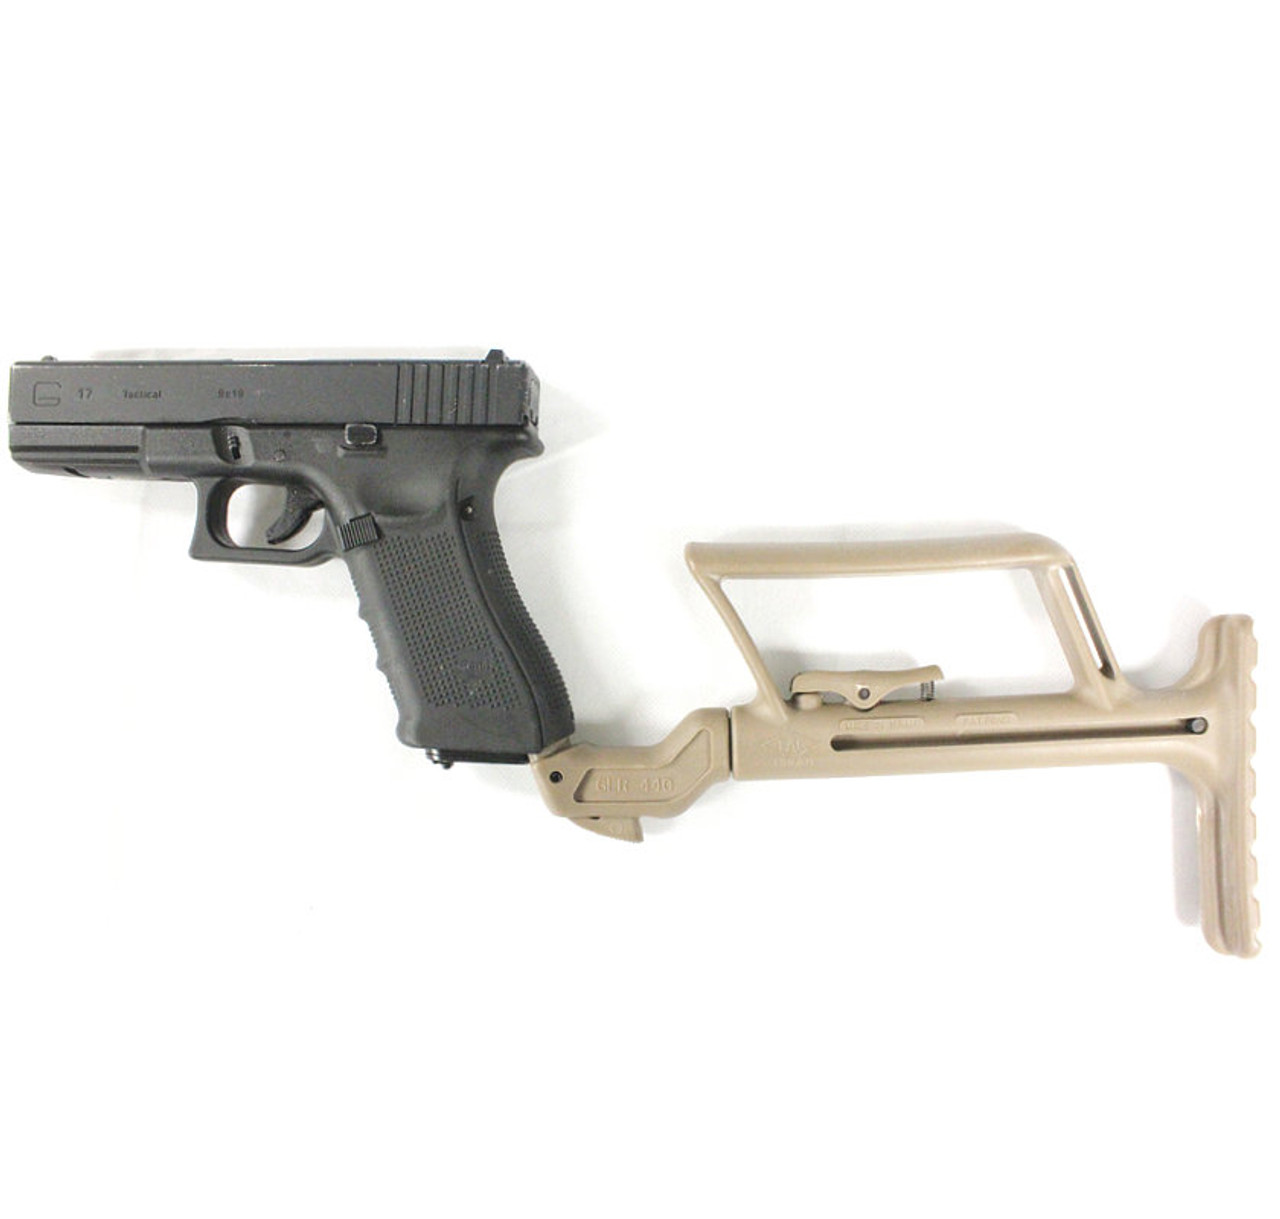 The Armory Knives GLR-440 Glock Compact Tactical Stock (Tan)